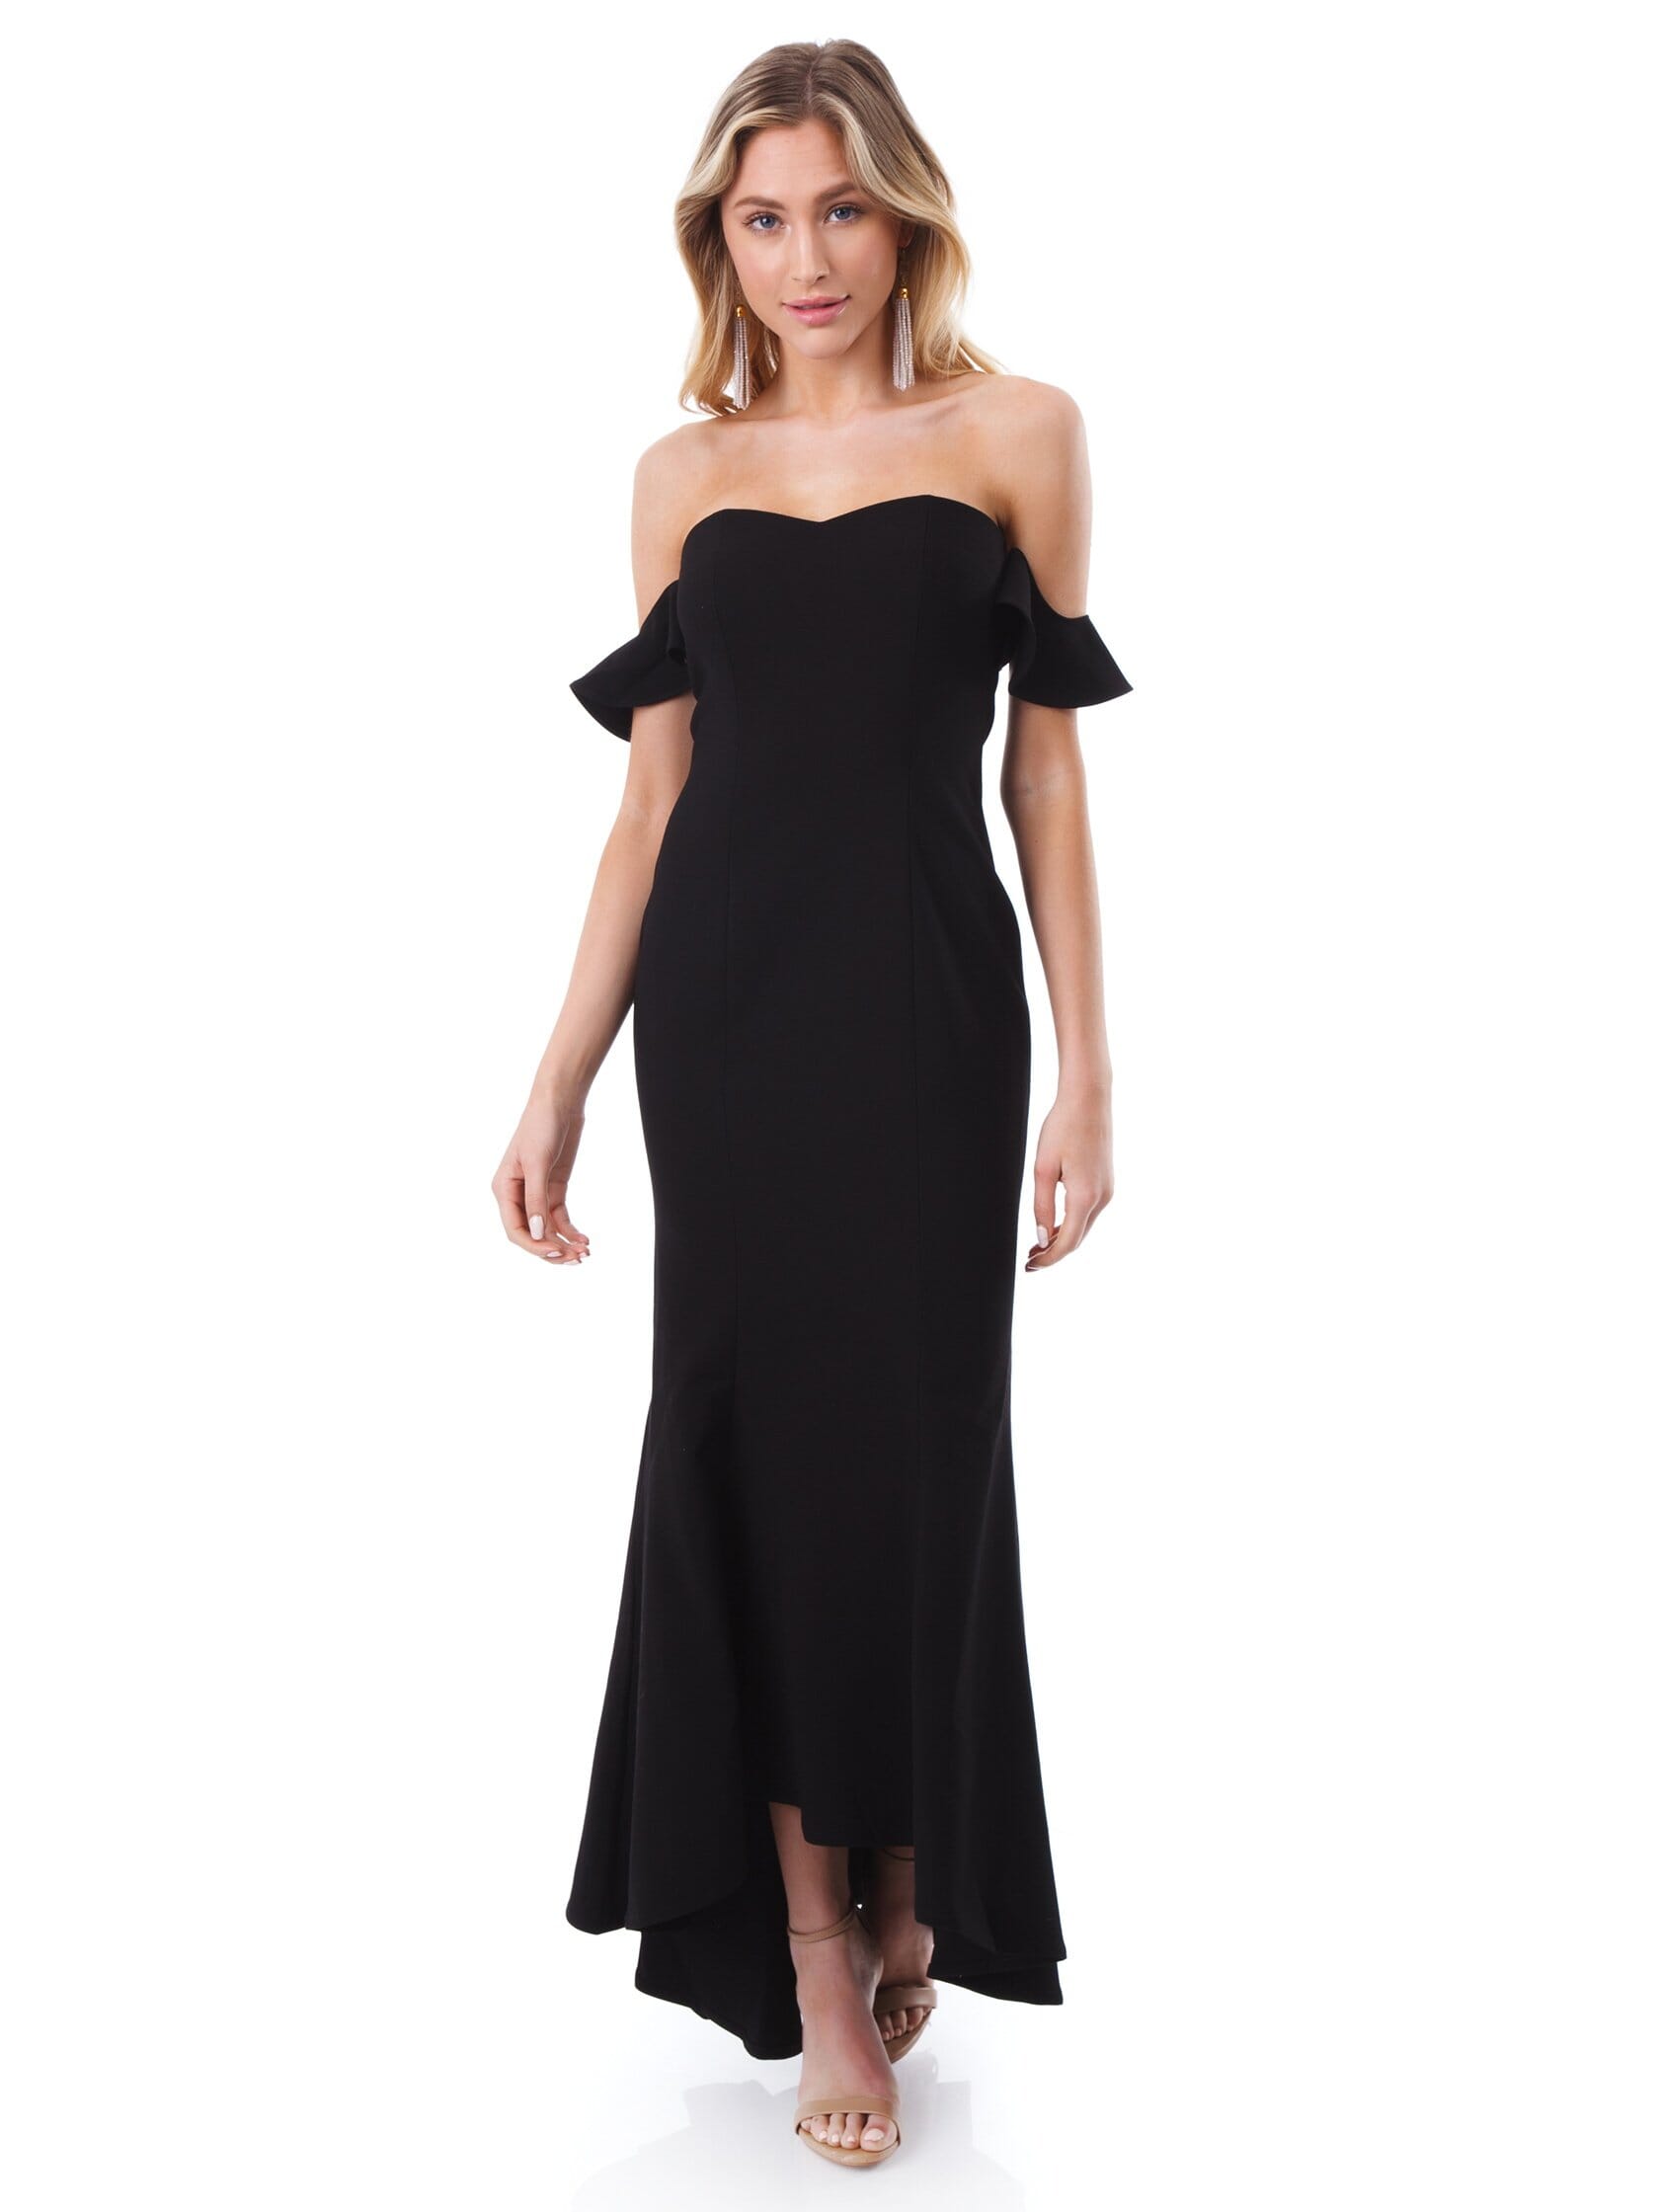 LIKELY | Sunset Gown in Black| FashionPass